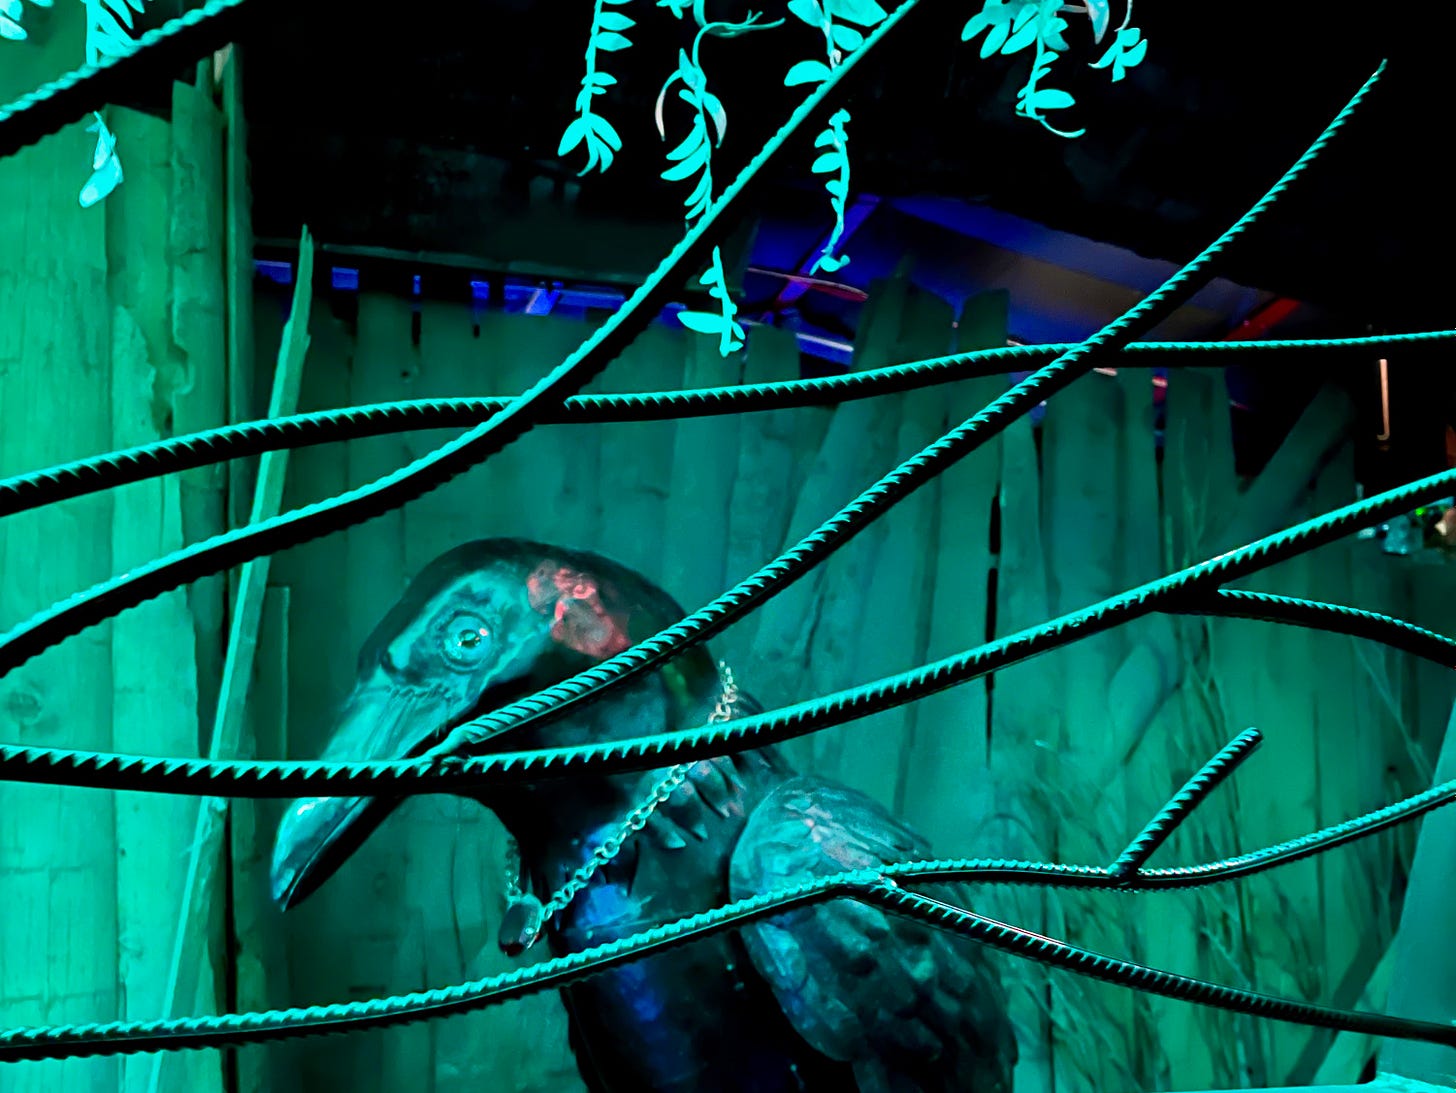 Crow statue behind a cage of rebar with green light filter. Taken at Meow Wolf, Santa Fe, NM